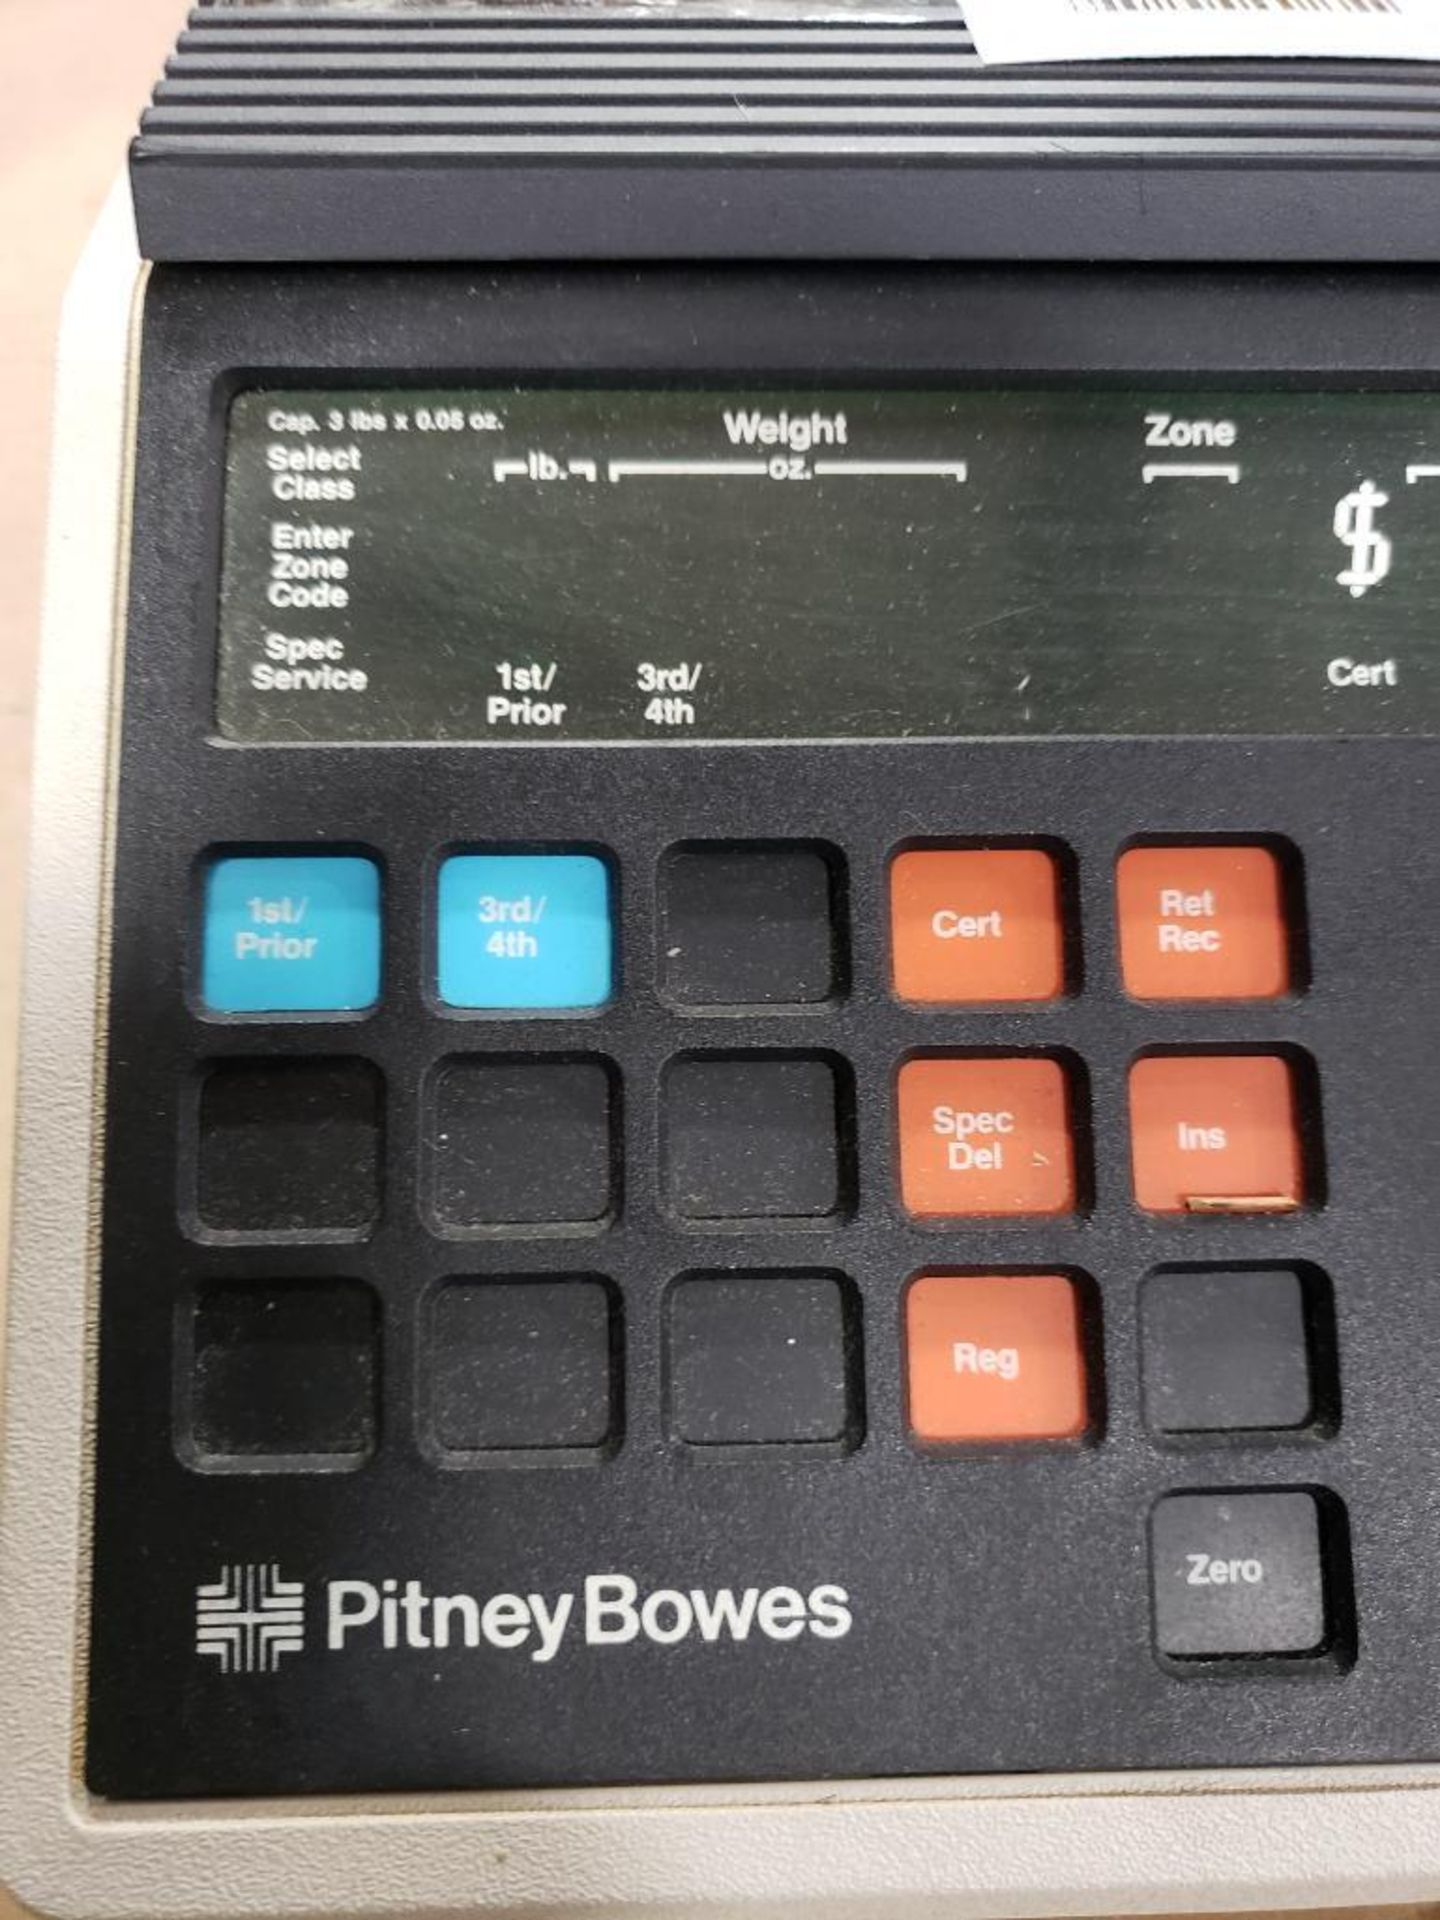 Pitney Bowes A523 digital scale. - Image 2 of 8